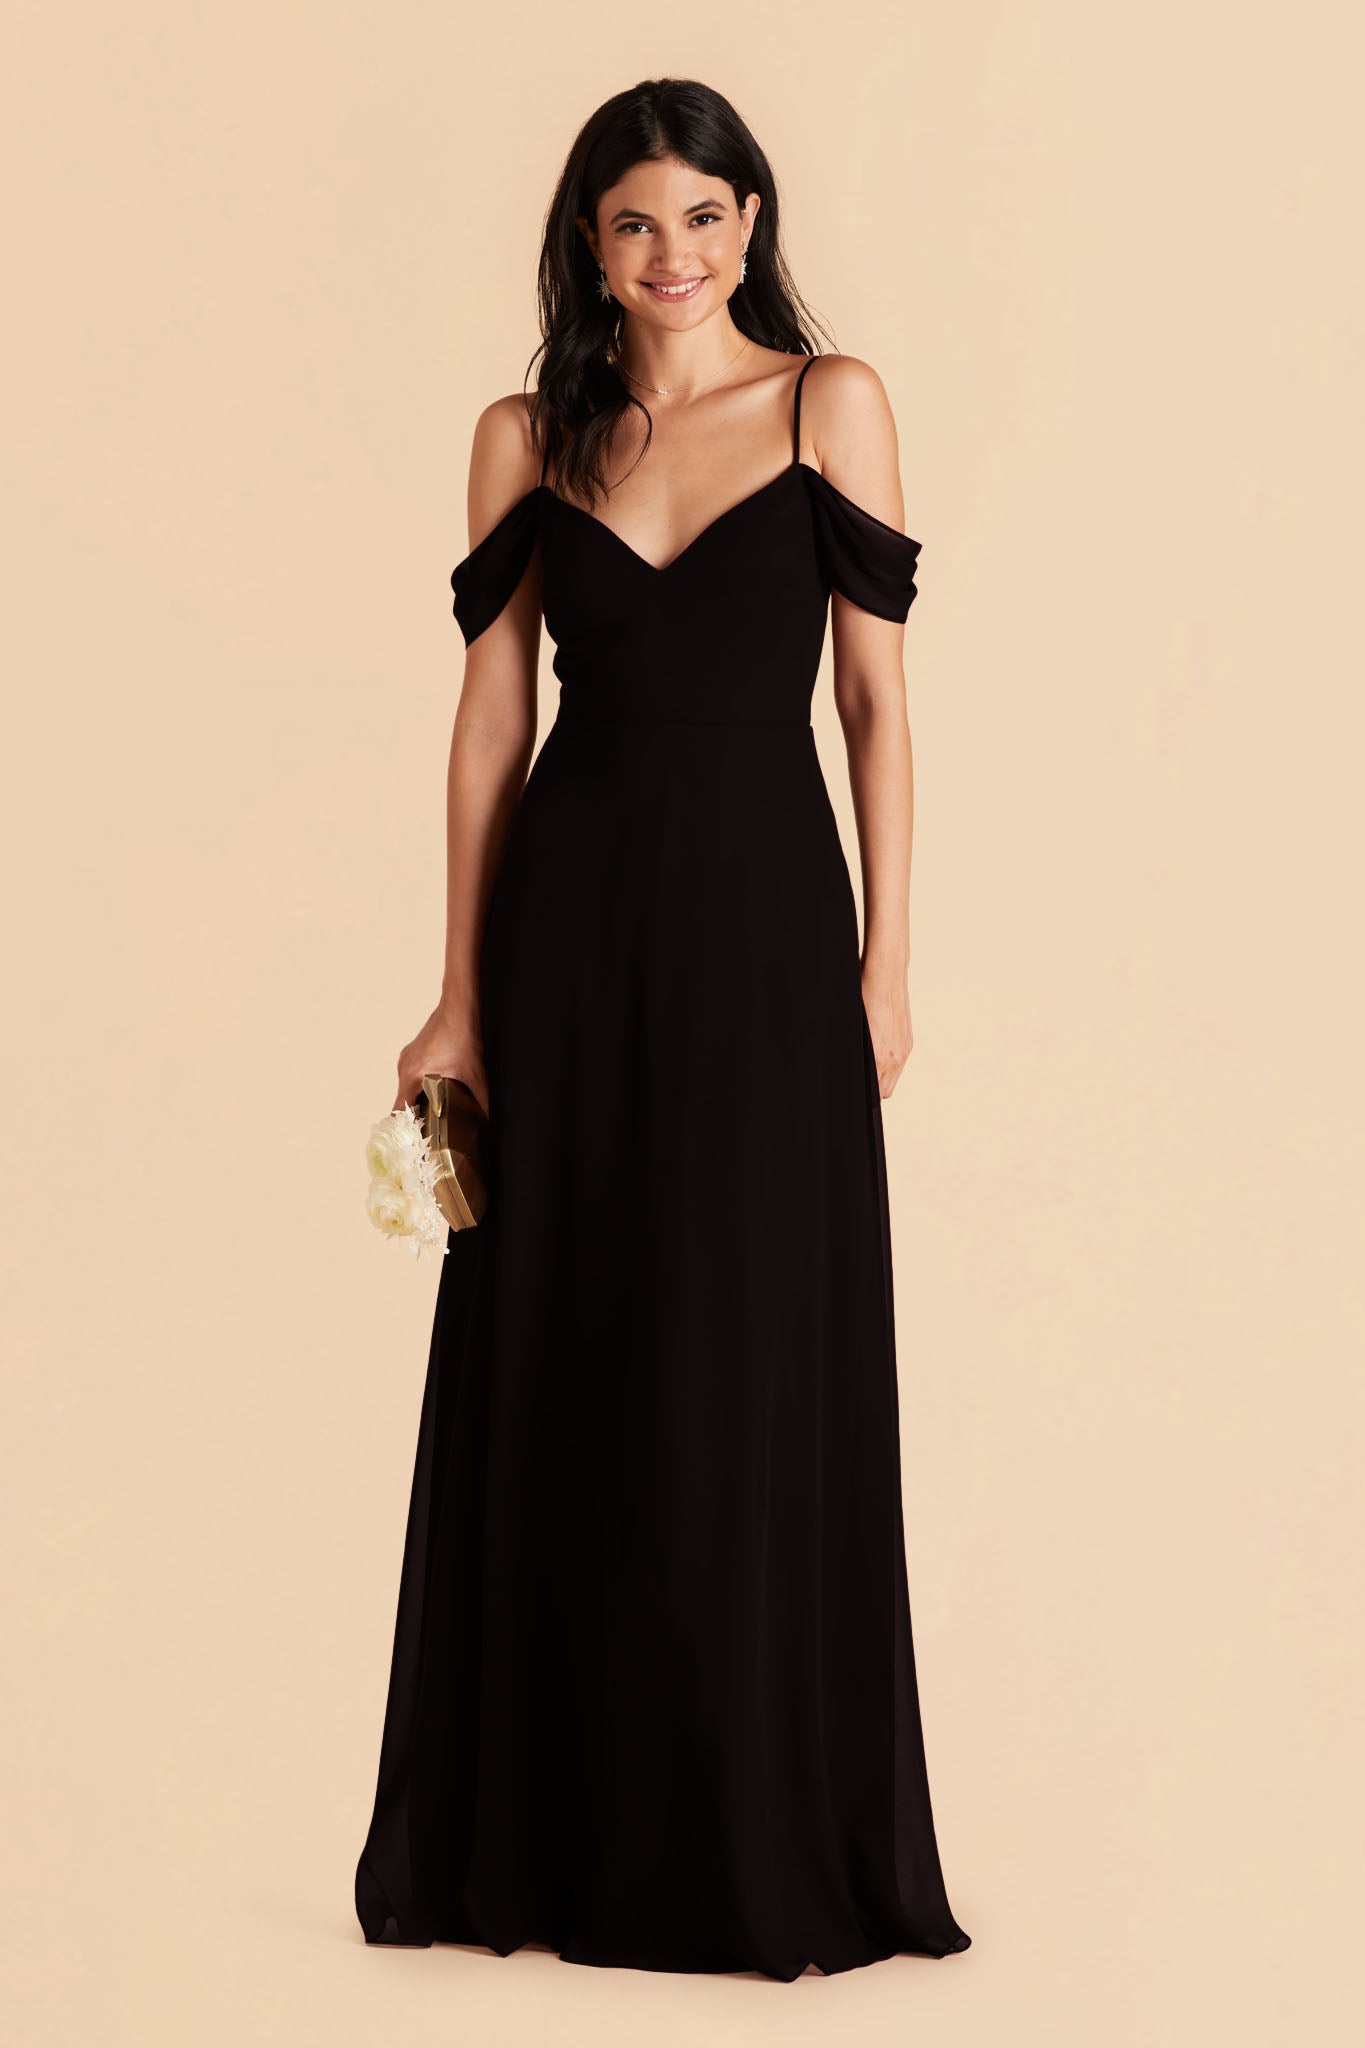 Long floor-sweeping black chiffon bridesmaid dress with a V-neckline and sleeves